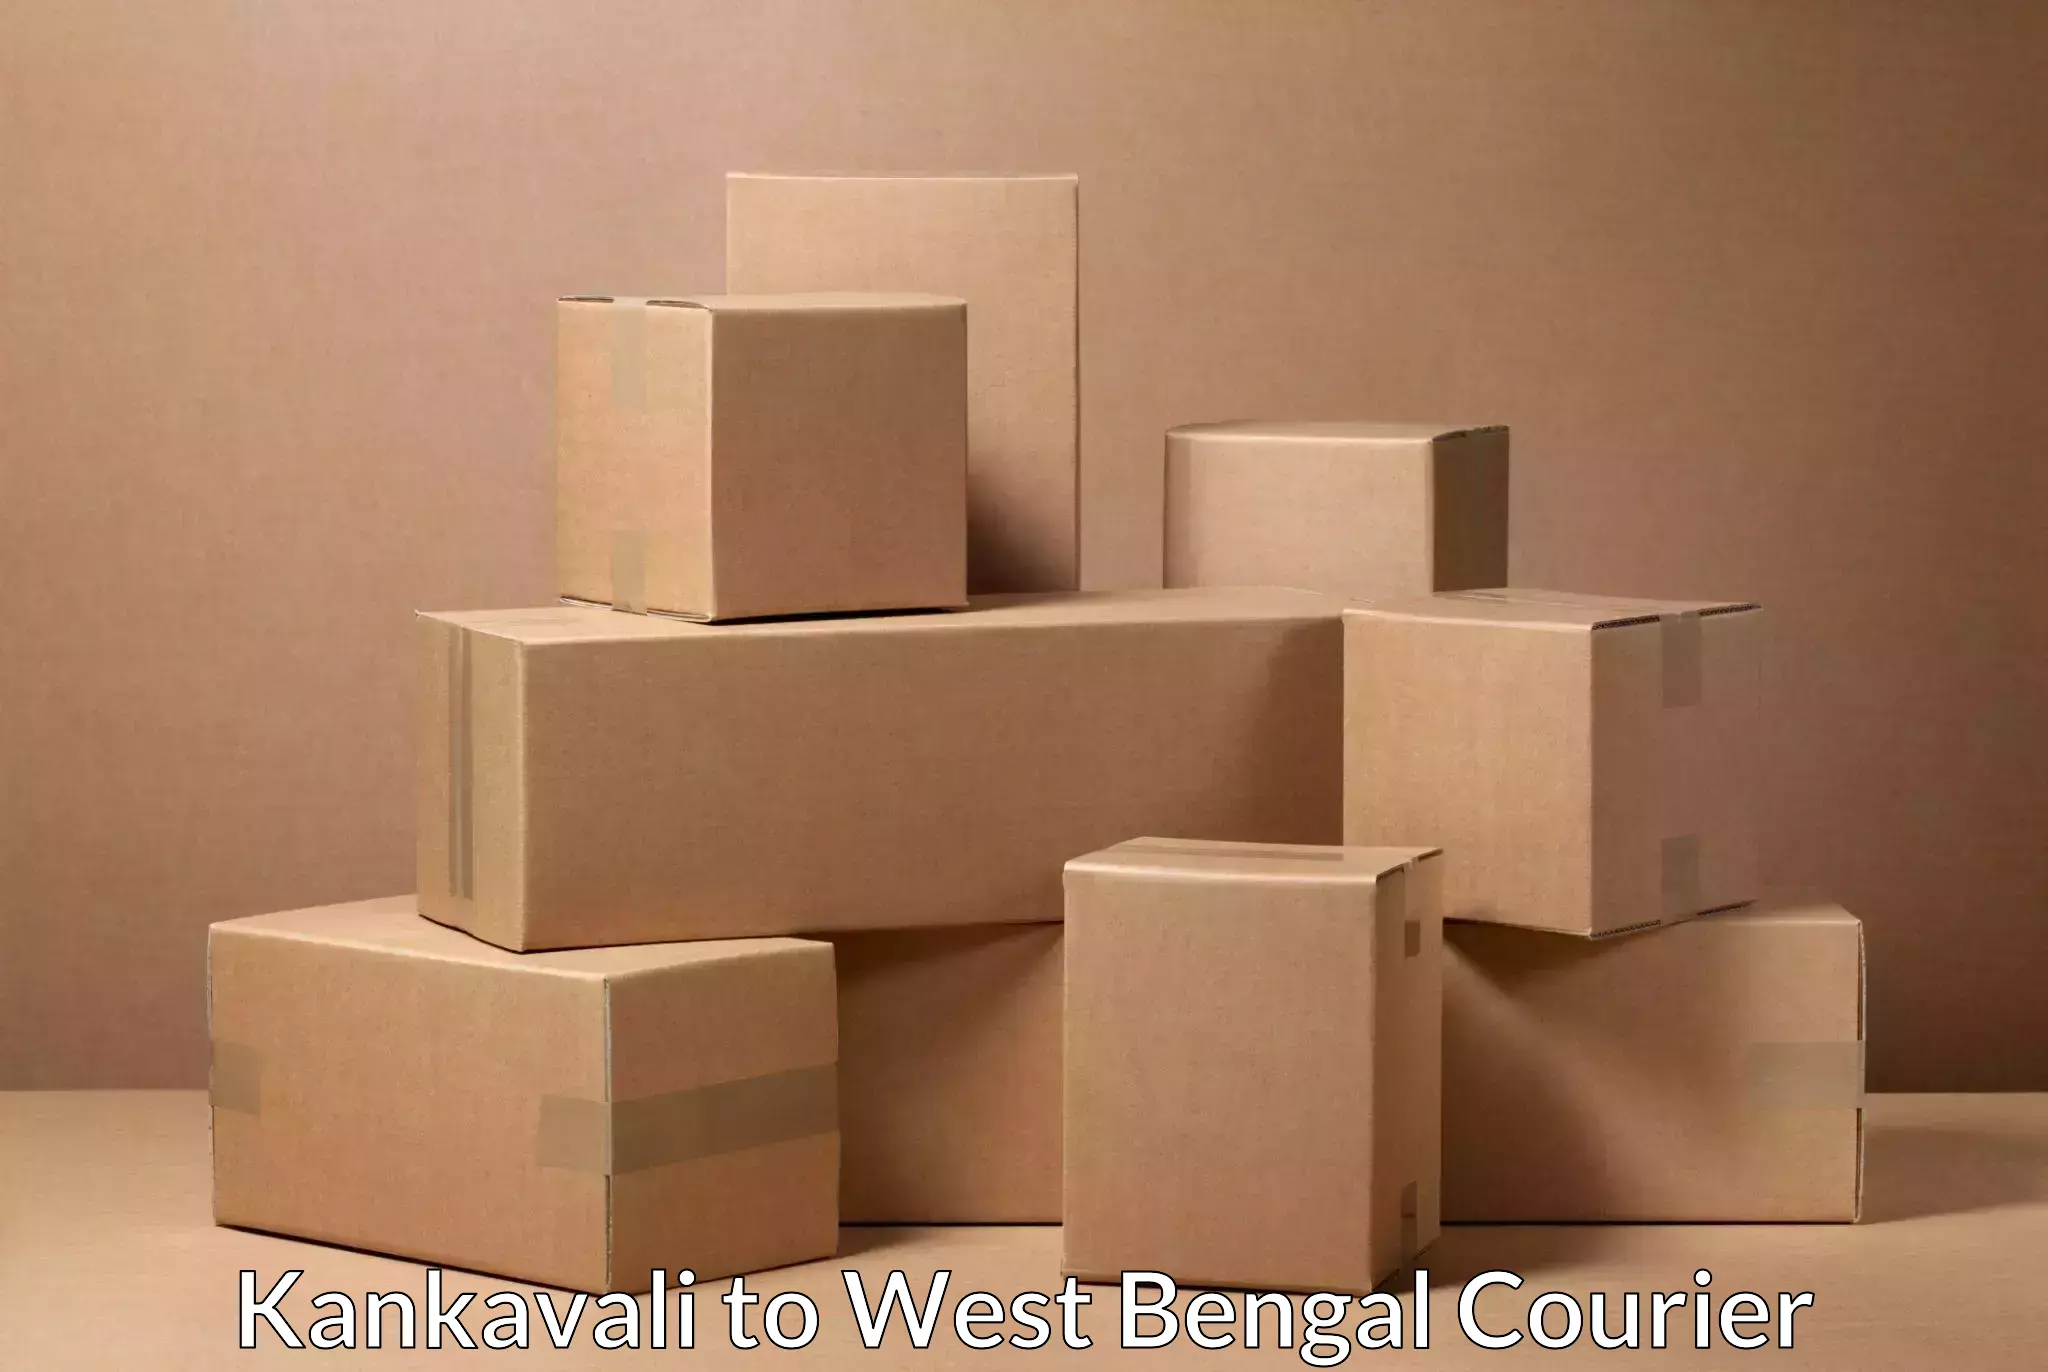 Round-the-clock parcel delivery in Kankavali to Nakashipara